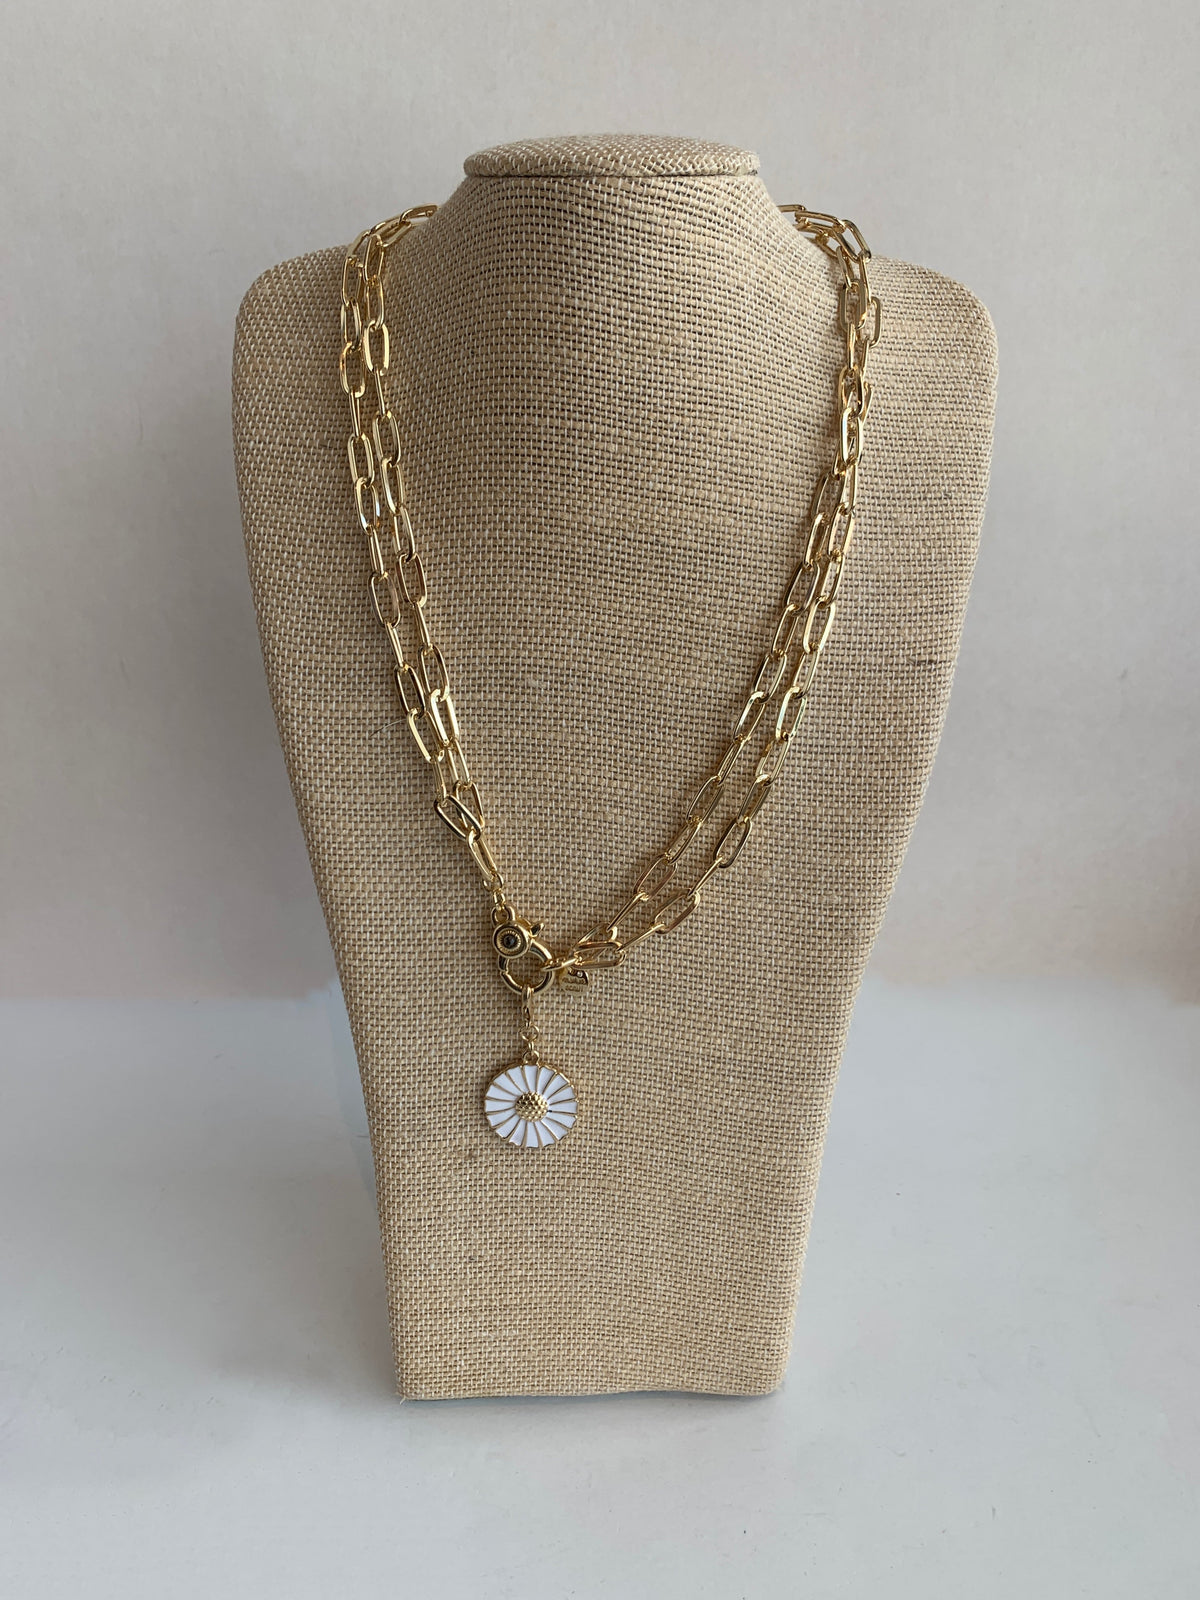 Daisy chain link necklace